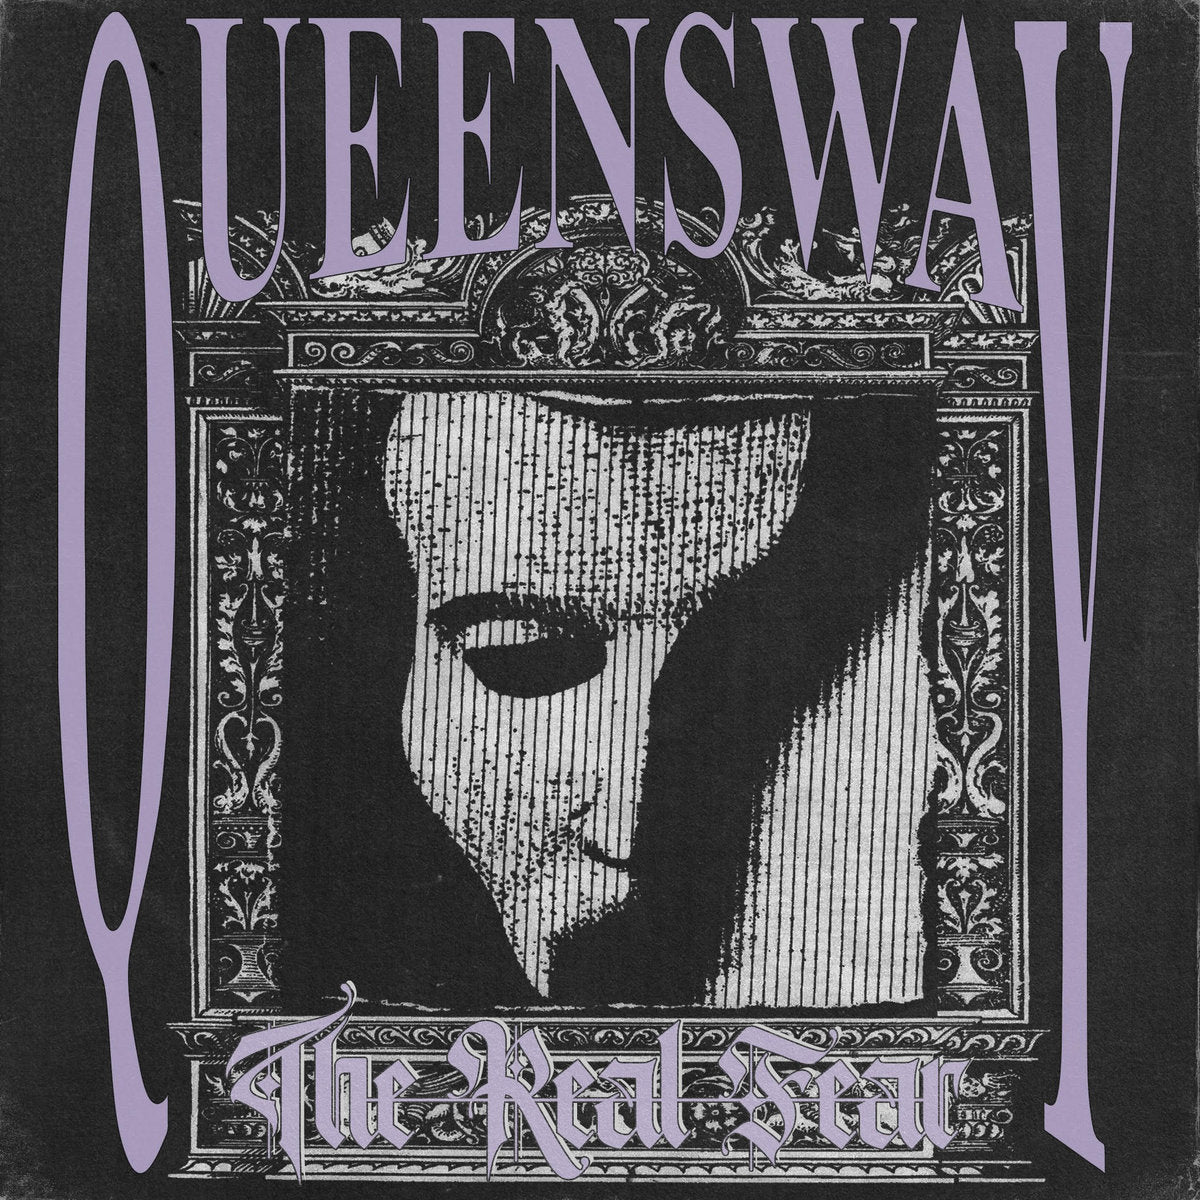 QUEENSWAY "The Real Fear" CD